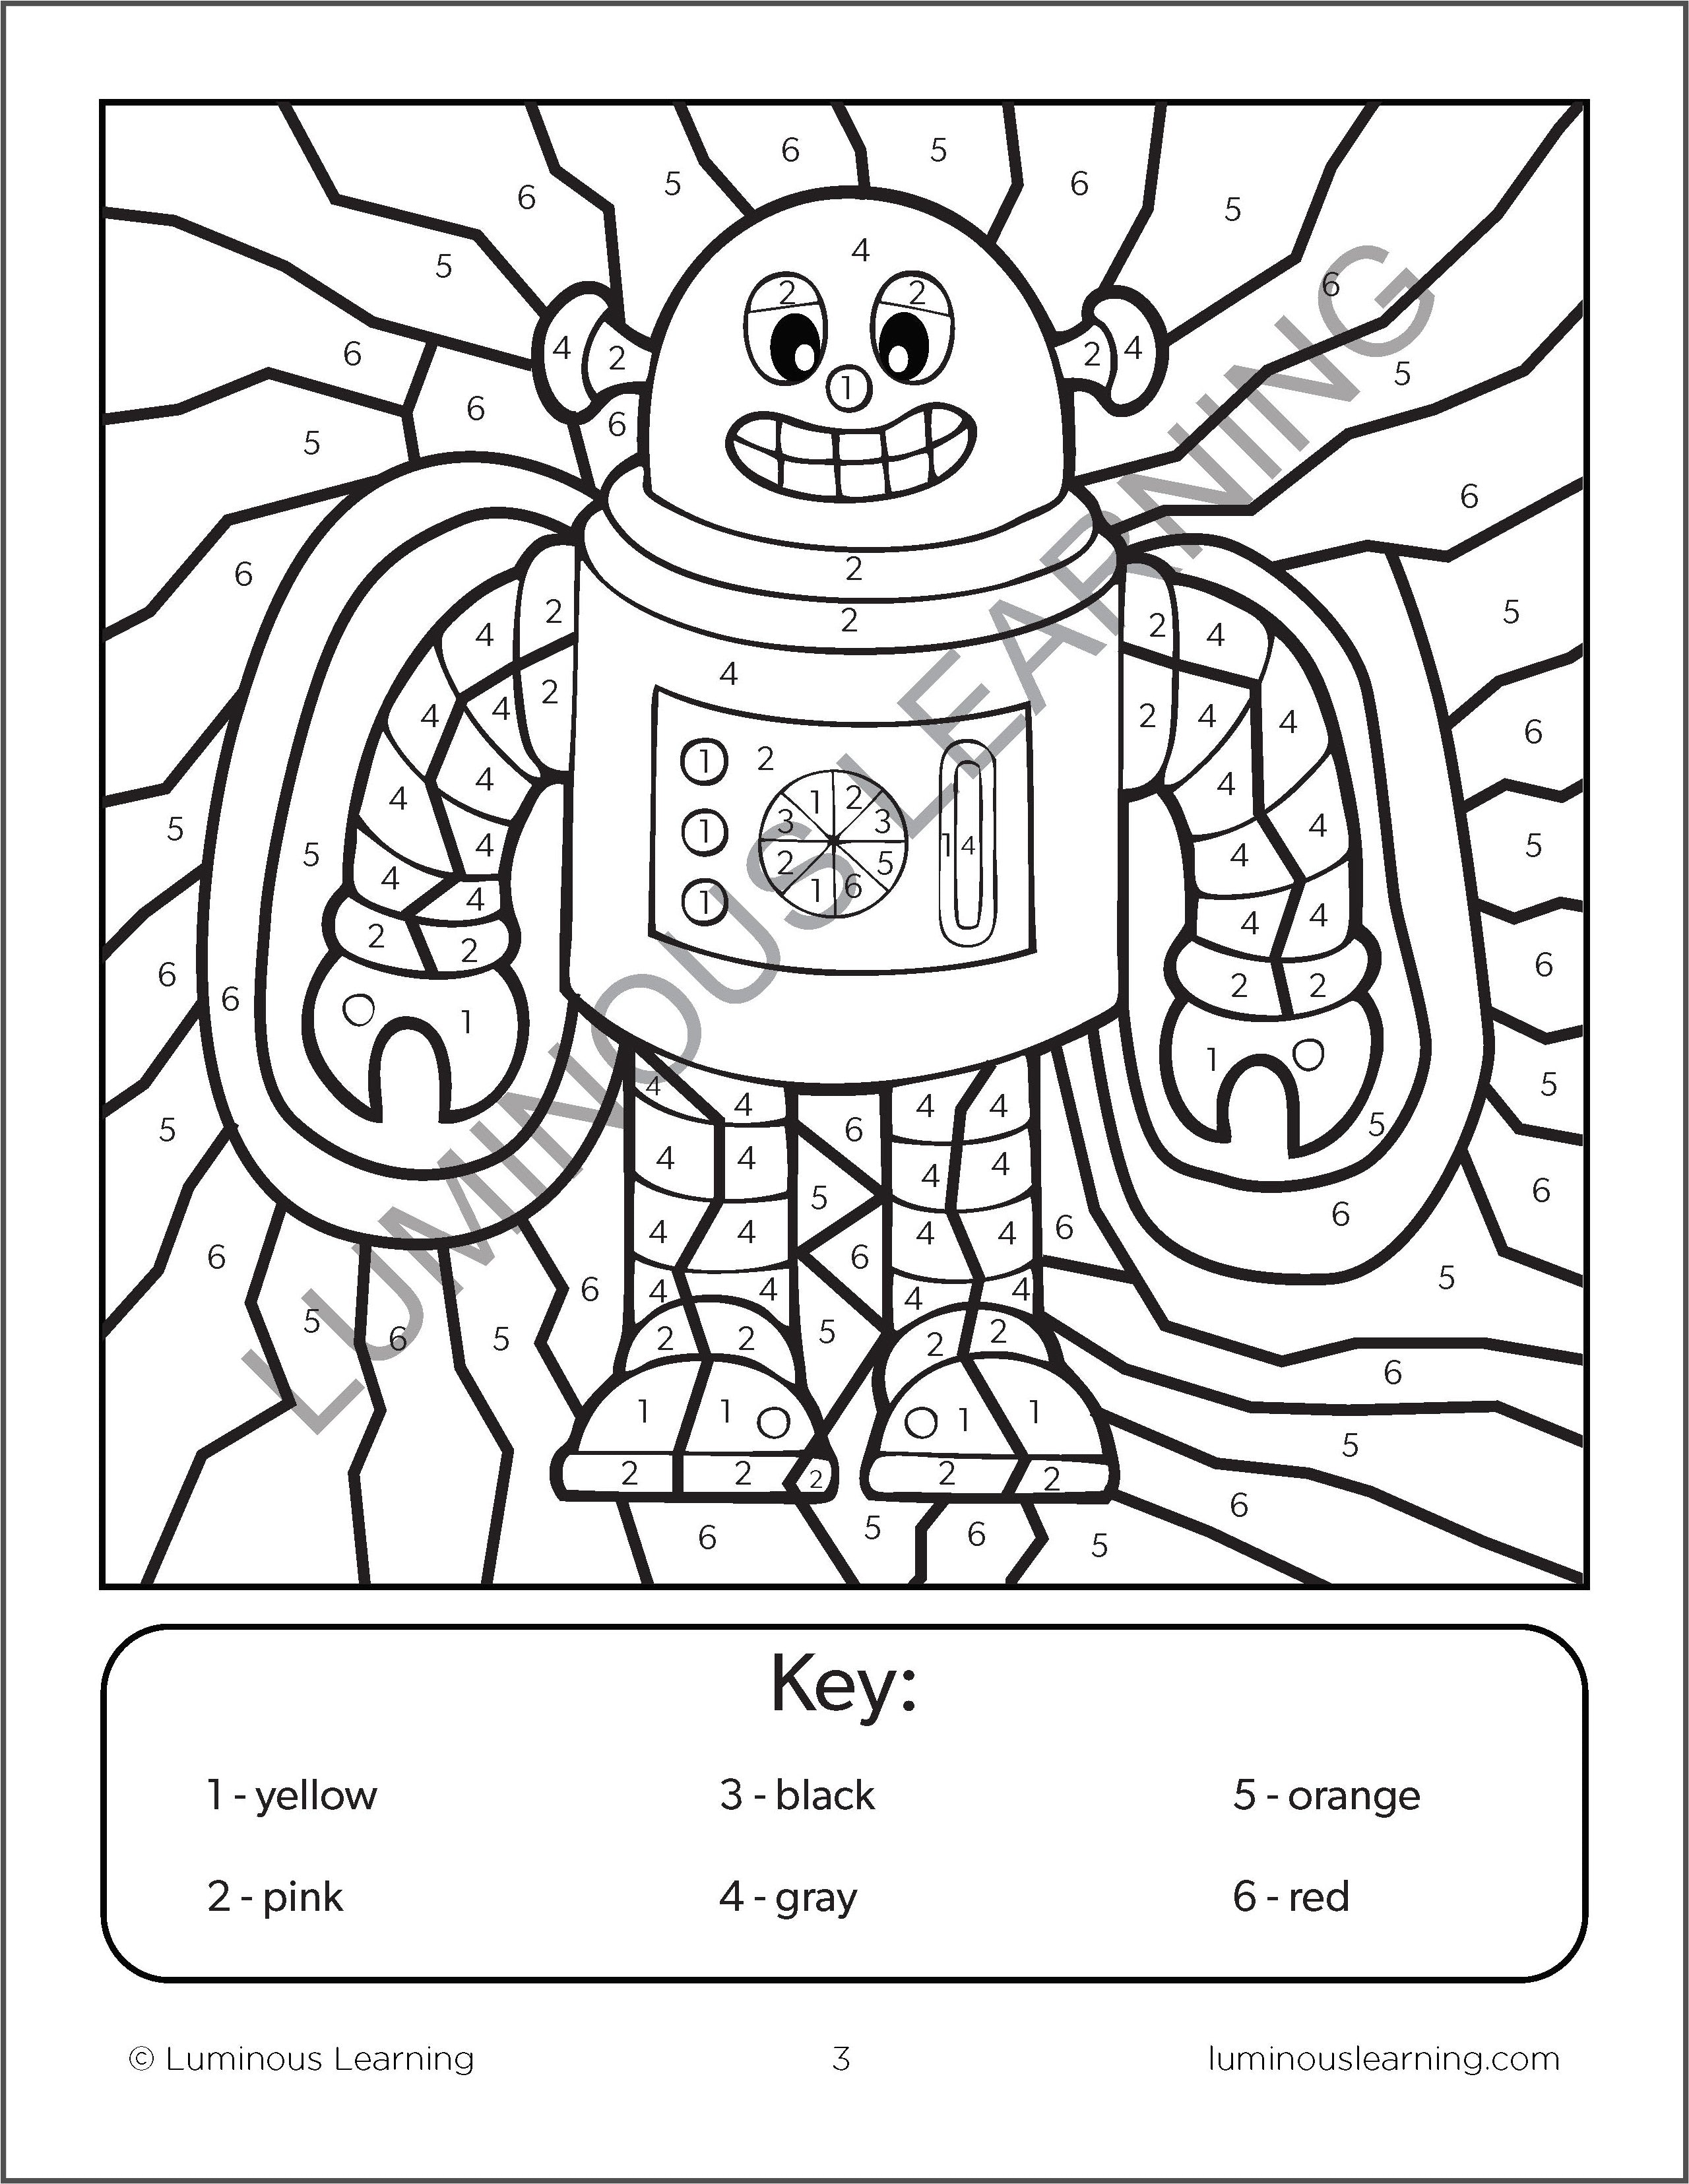 Robot animals Coloring Books for Kids: coloring books for kids